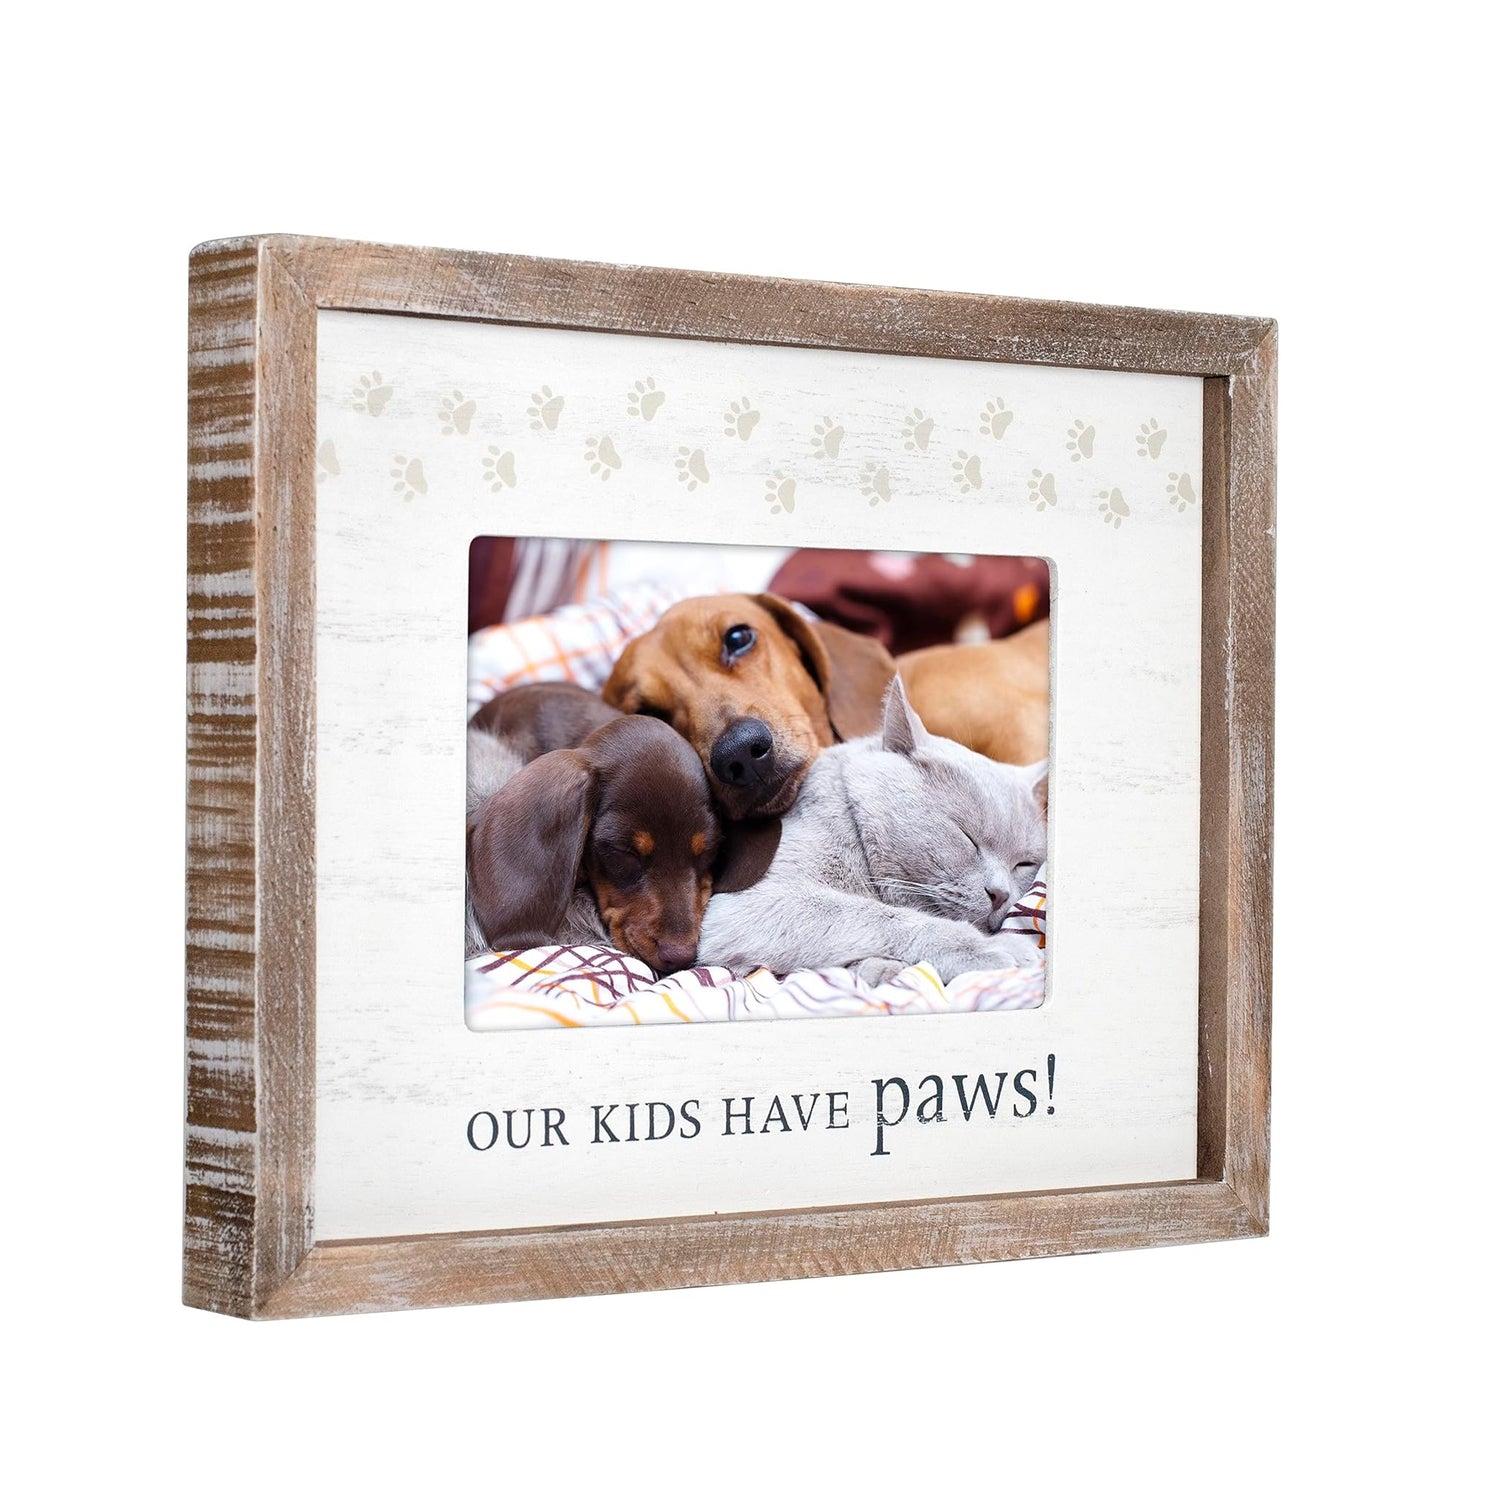 Malden "OUR KIDS HAVE paws!" Pet Rustic Border Picture Frame